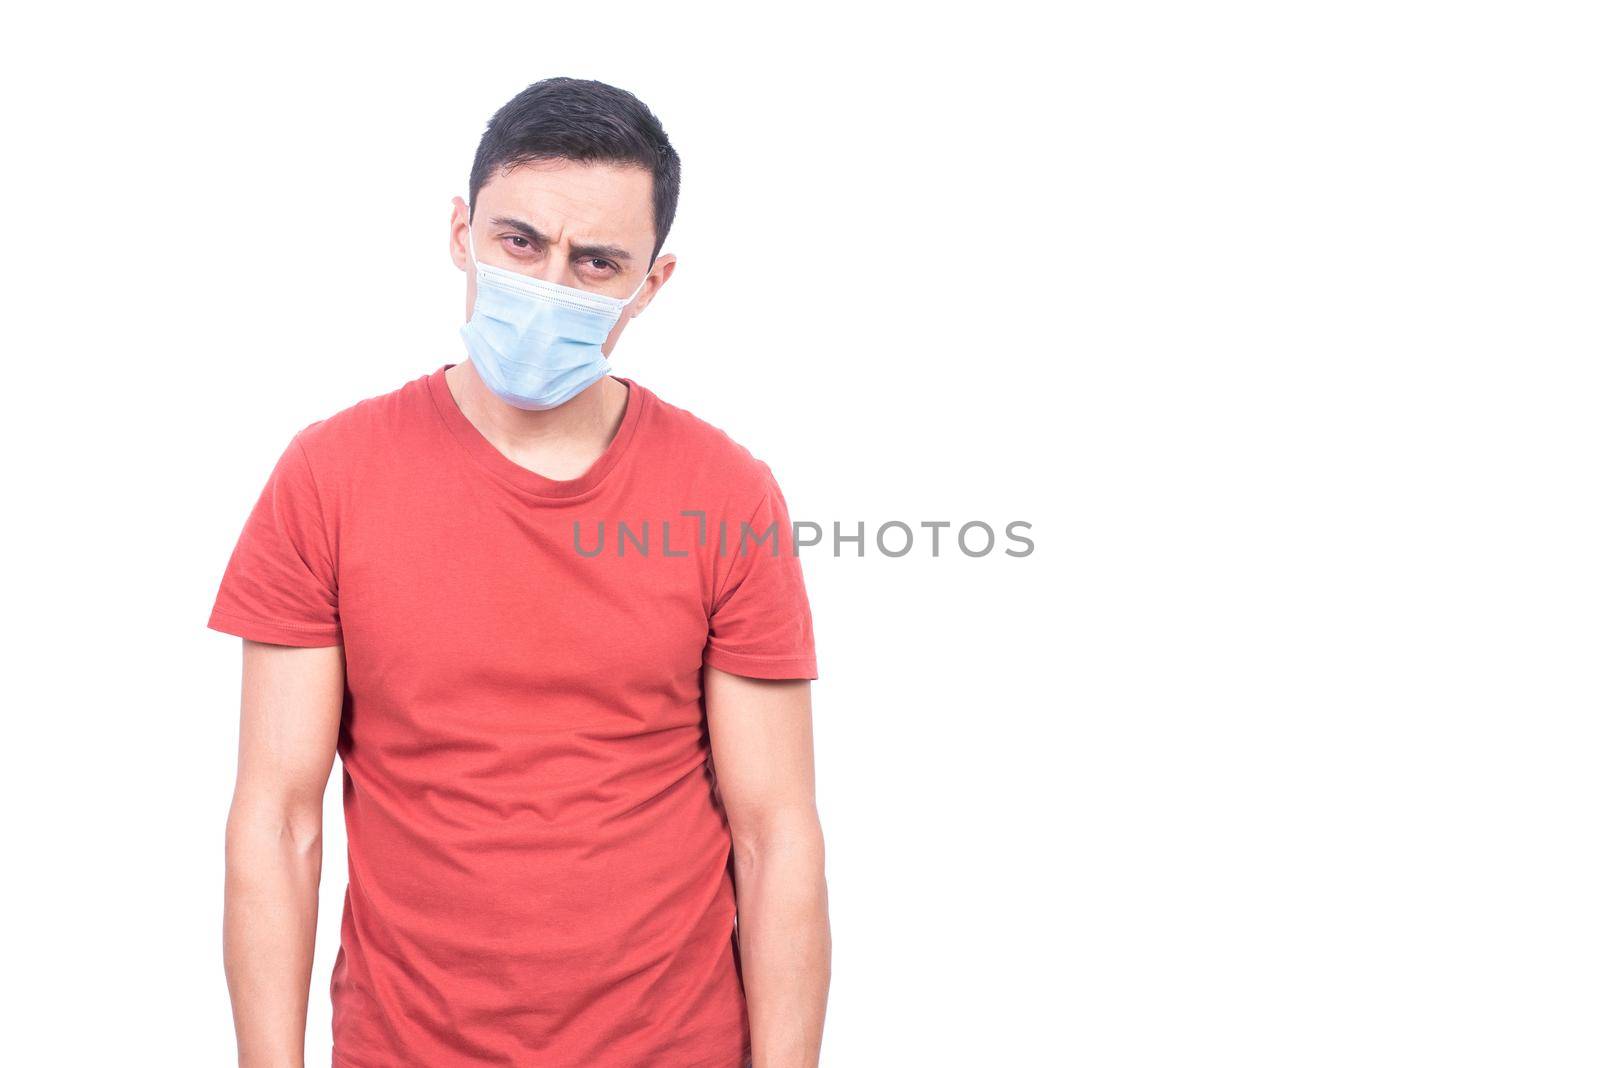 Sad sick COVID infected male in protective mask looking at camera while standing isolated on white background during coronavirus pandemic